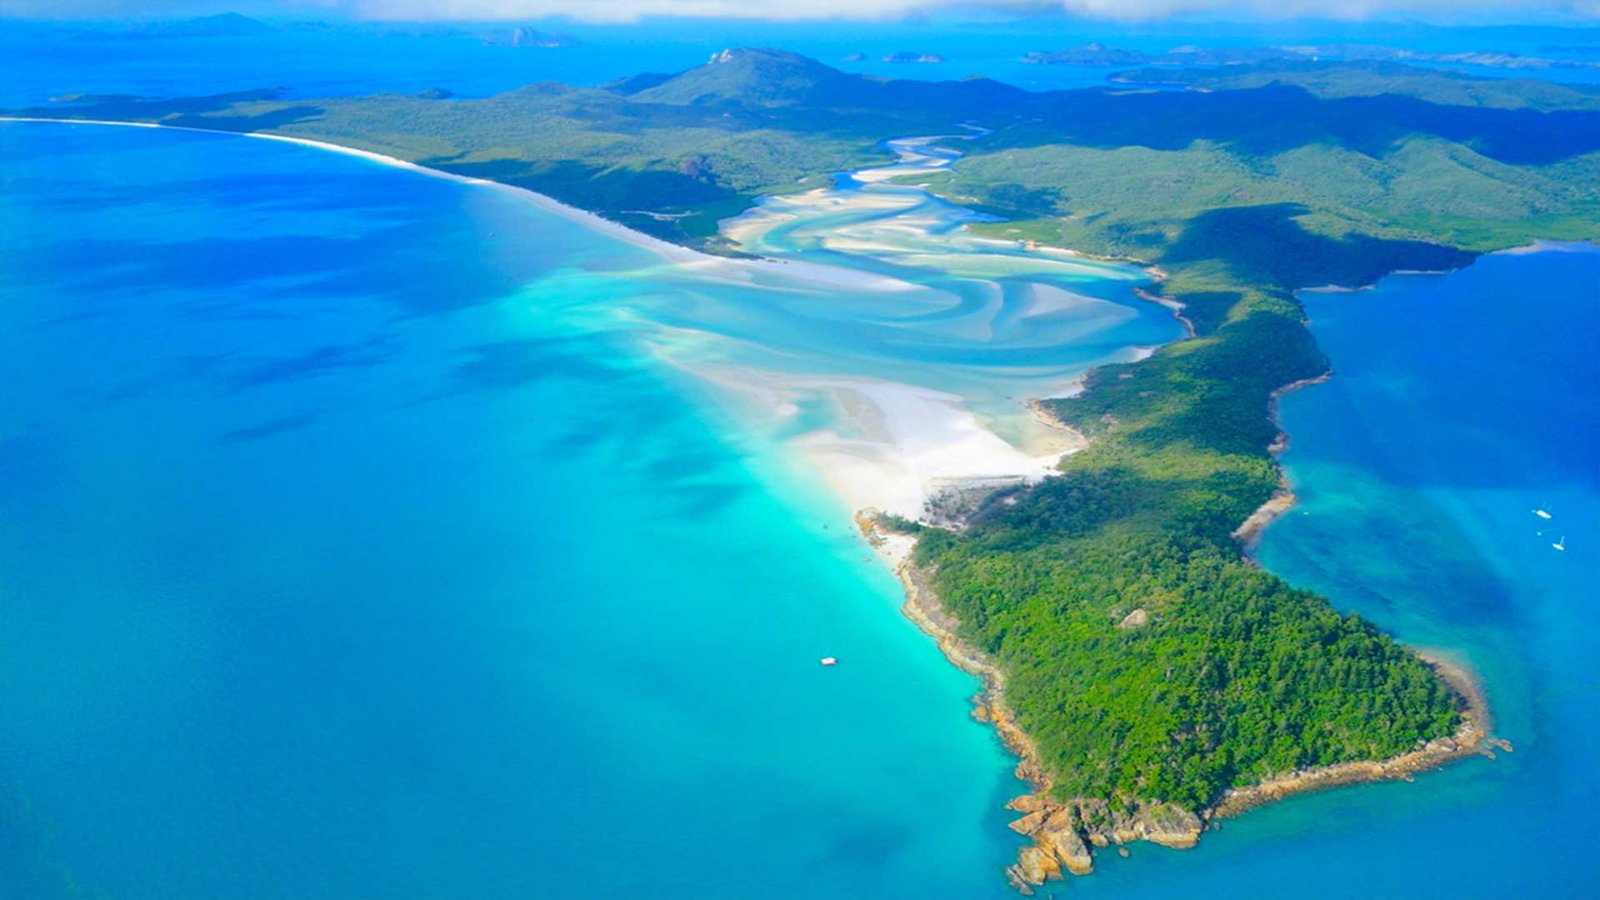 Whitsundays Top 16 Most Beautiful Islands in the World Zen Tripstar island islands beautiful islands tropical islands Martinique hvar top 10